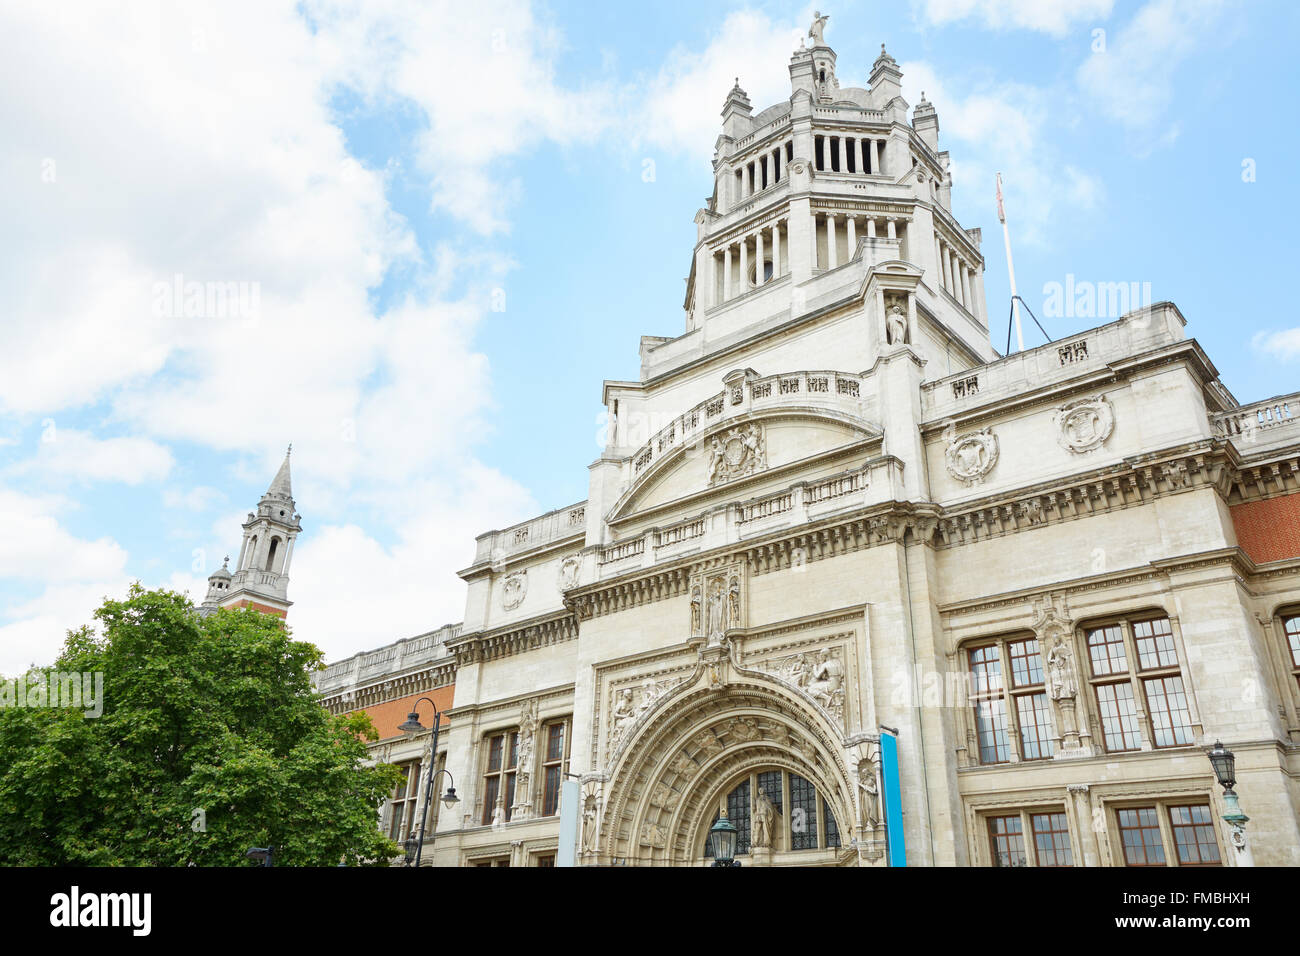 Victoria and Albert museum facade in London, blue and cloudy sky Stock Photo